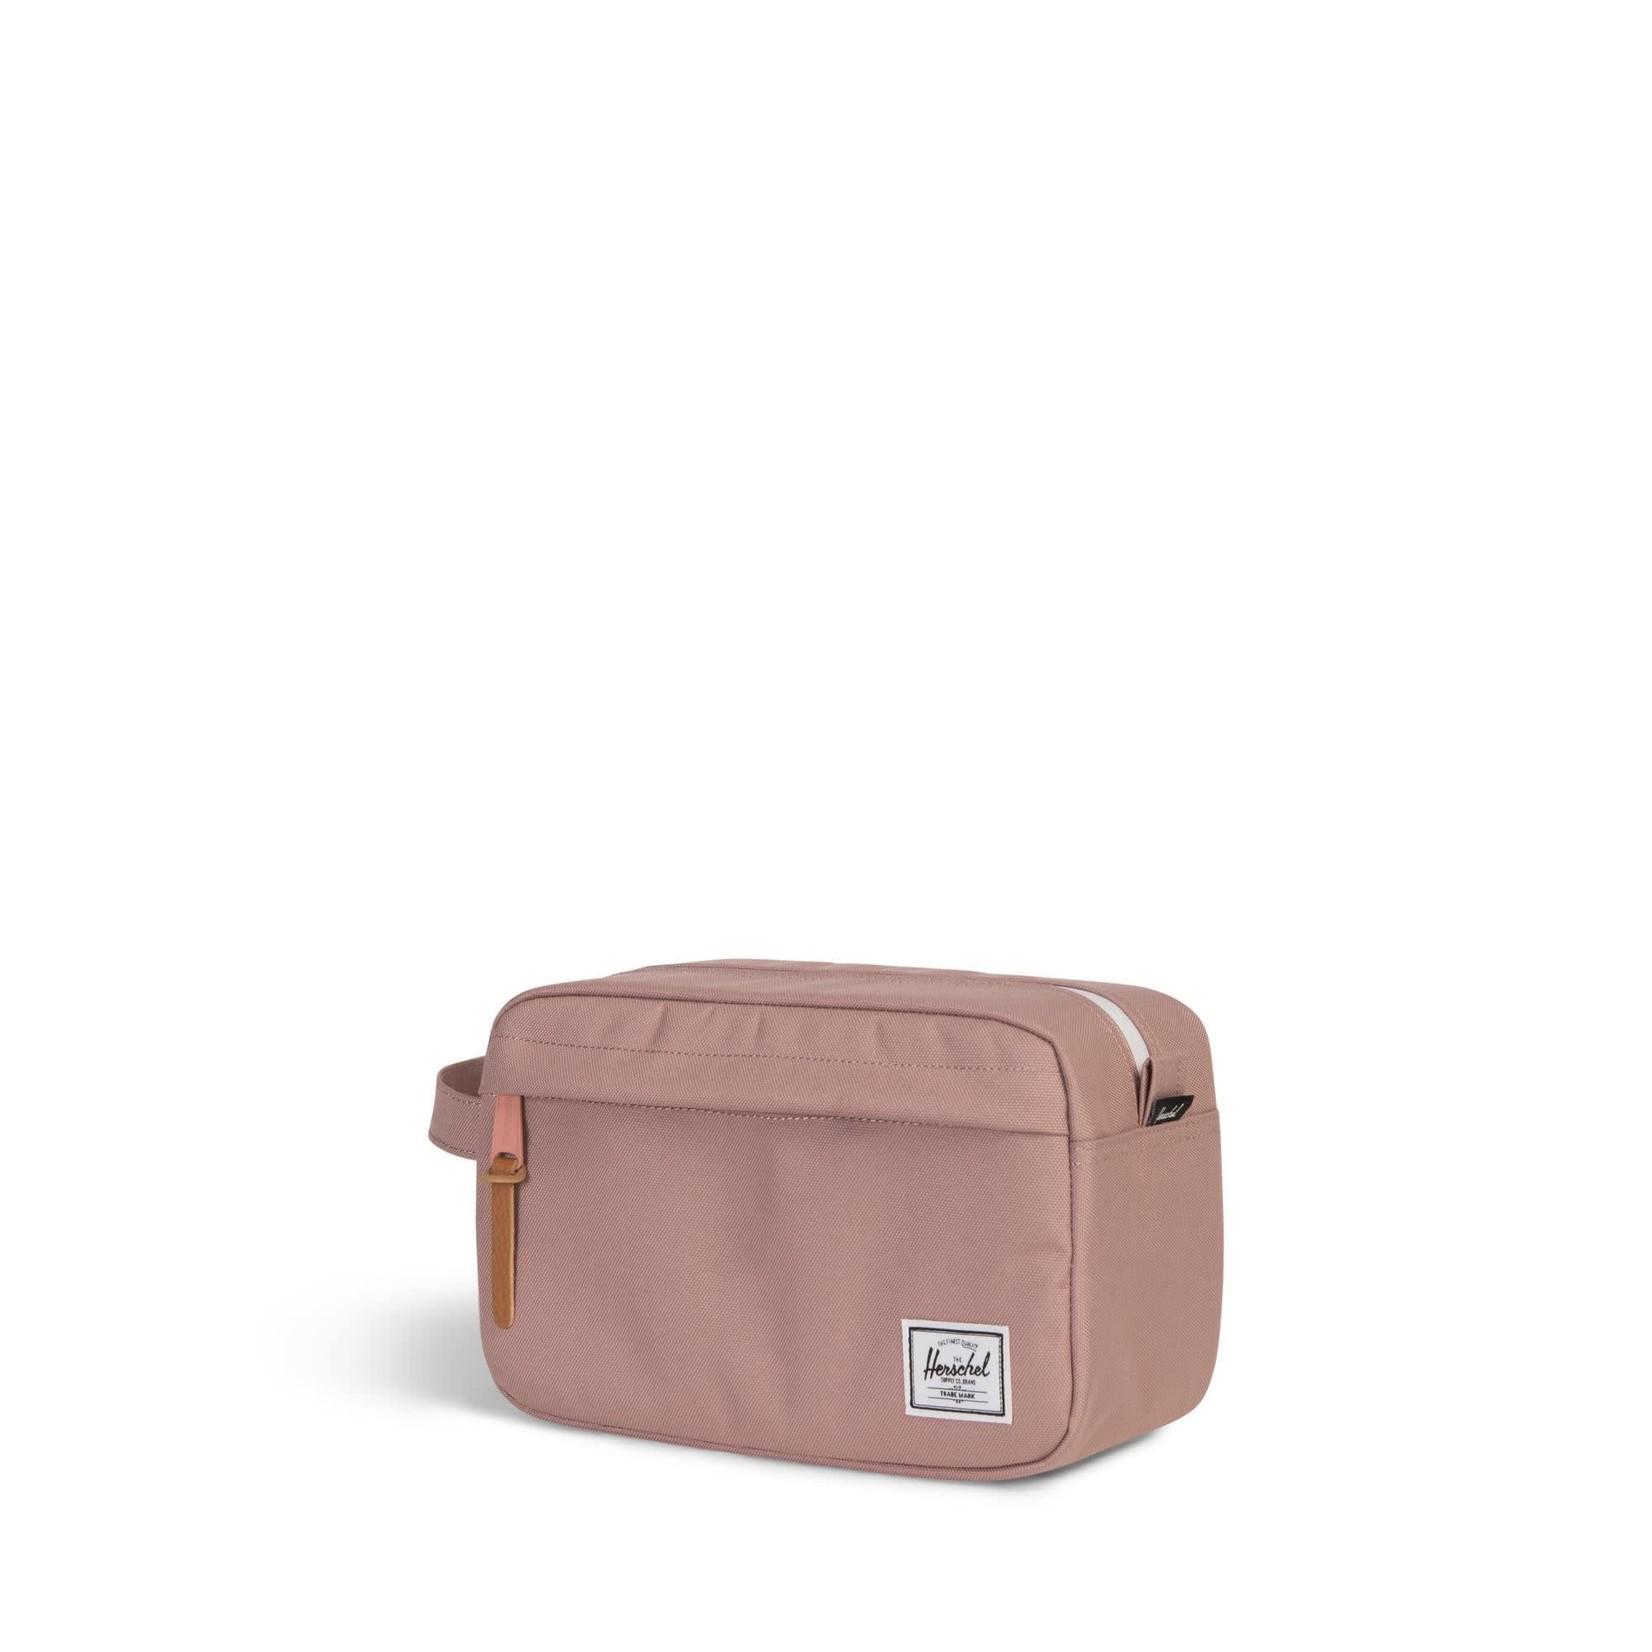 HERSCHEL CHAPTER CARRY ON - ASH ROSE